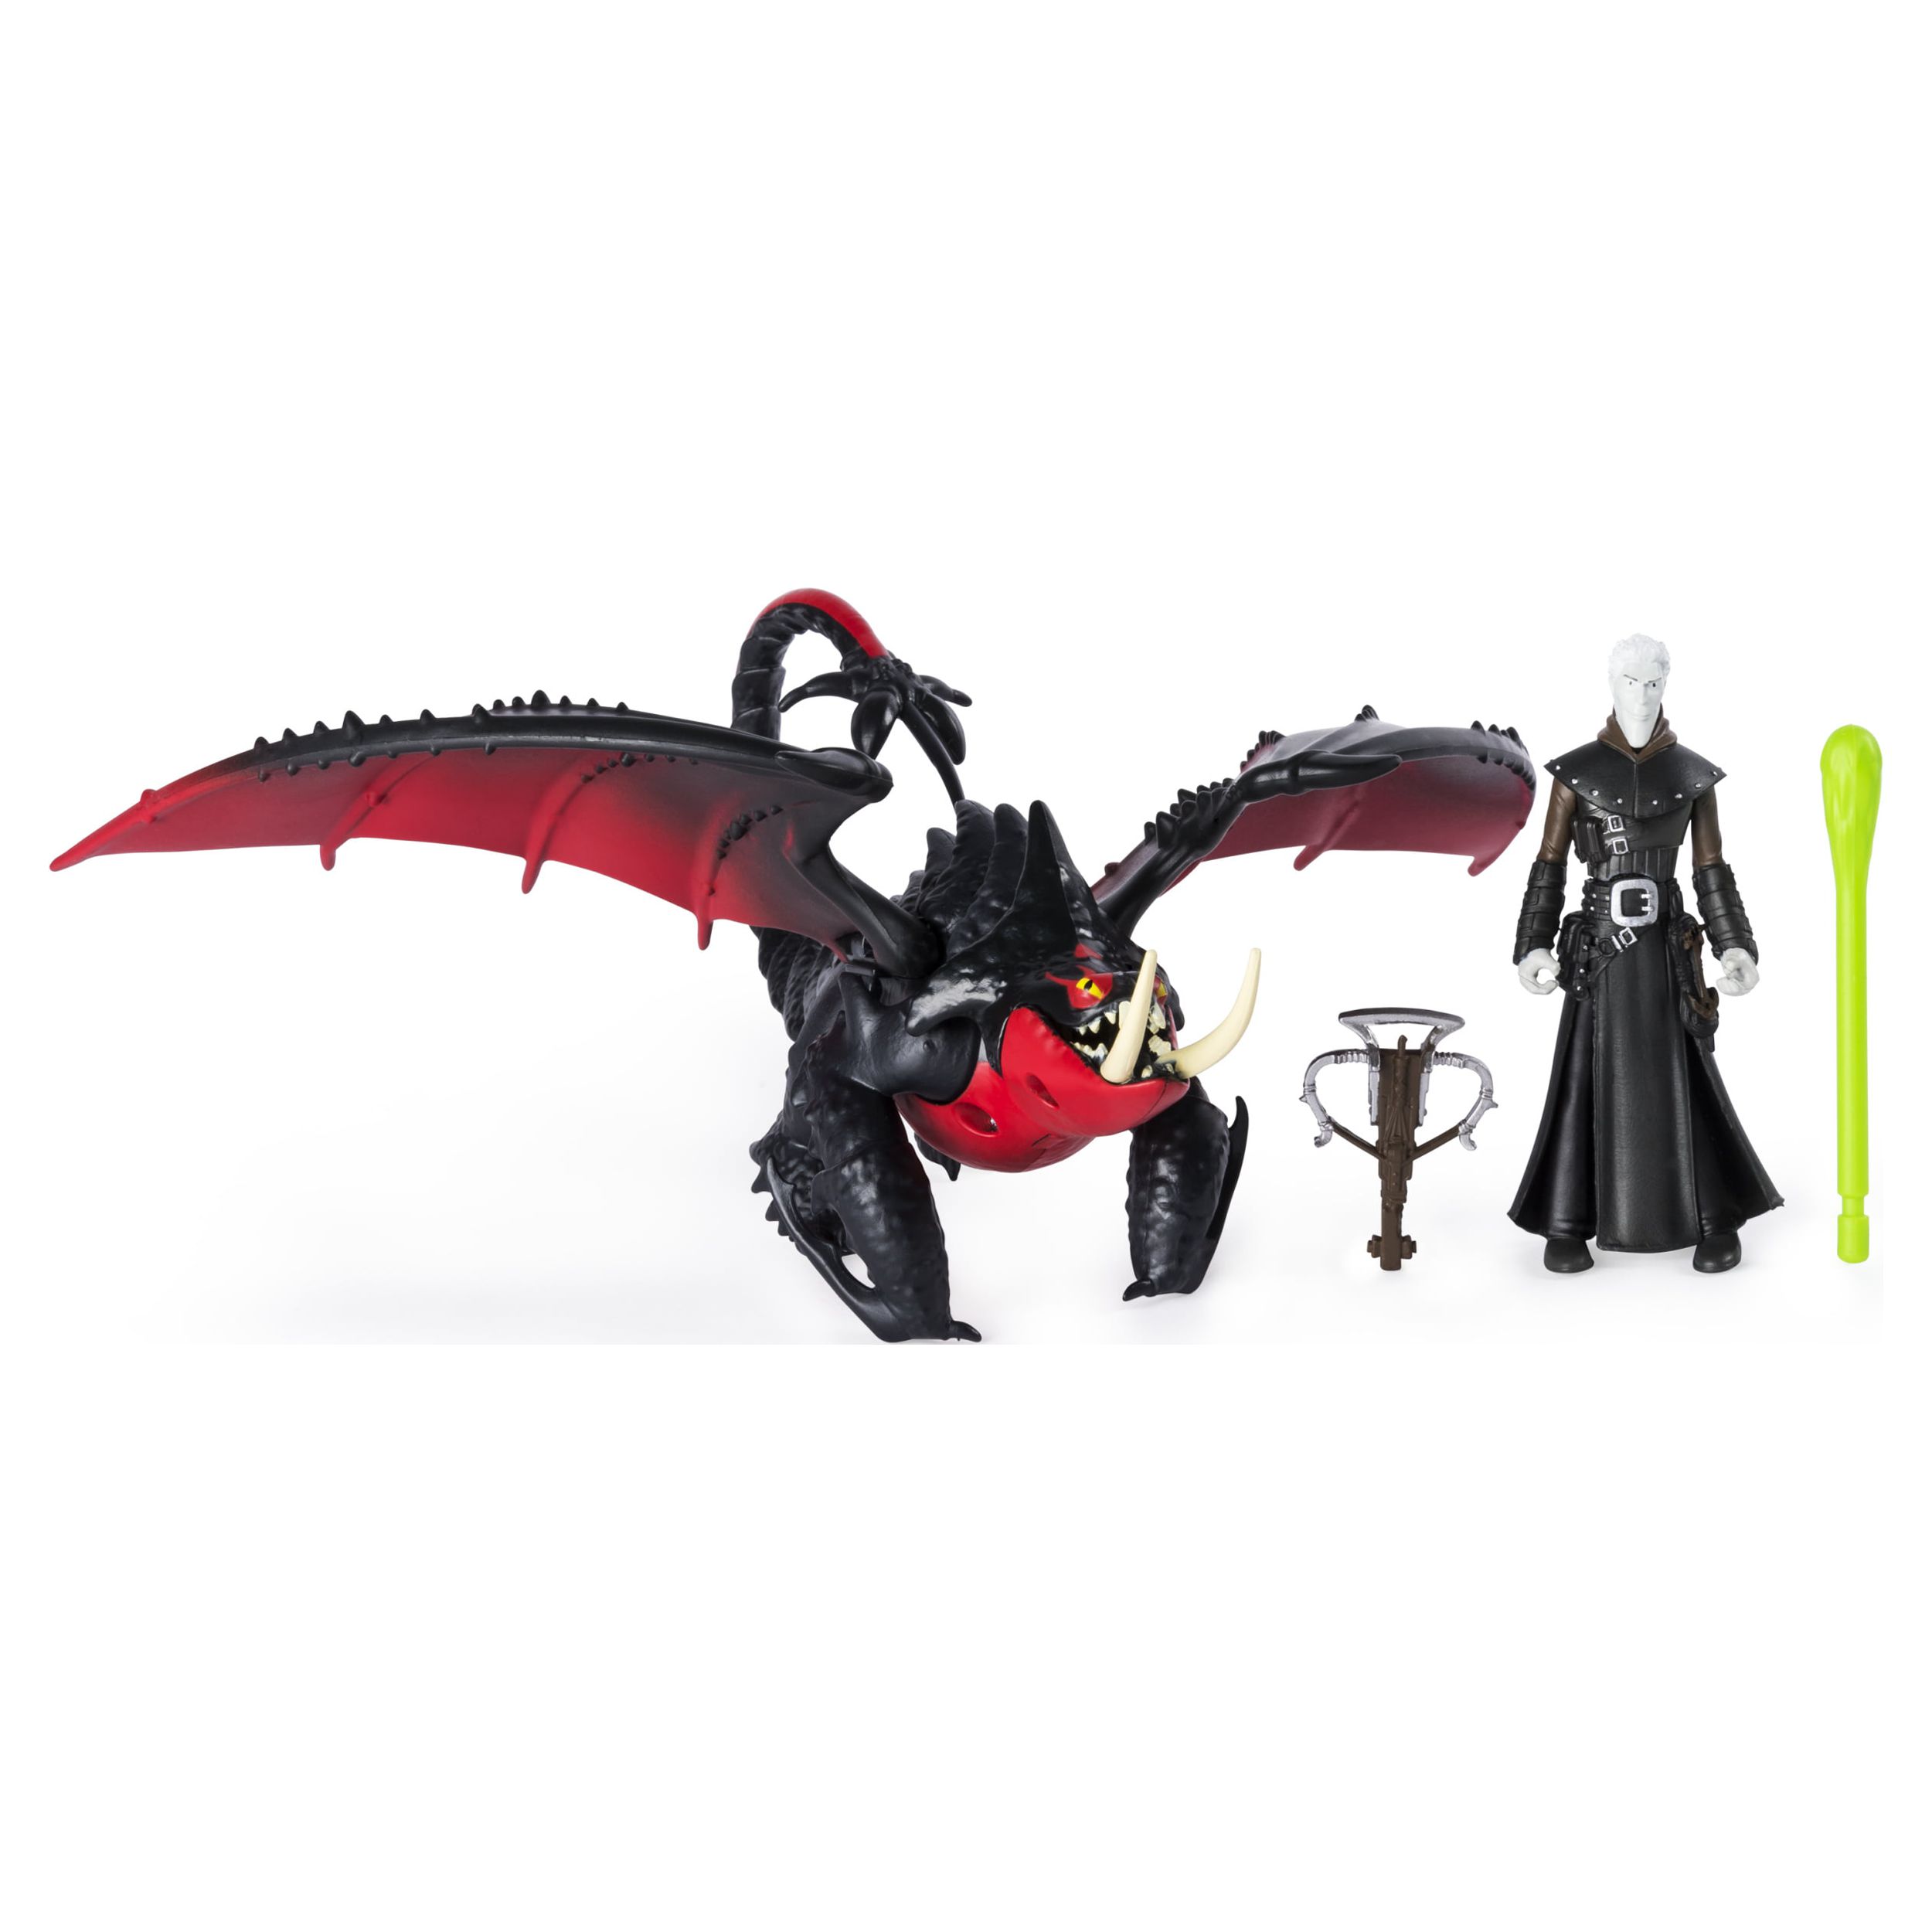 DreamWorks Dragons, Deathgripper and Grimmel, Dragon with Armored Viking Figure, for Kids Aged 4 and Up - image 2 of 6